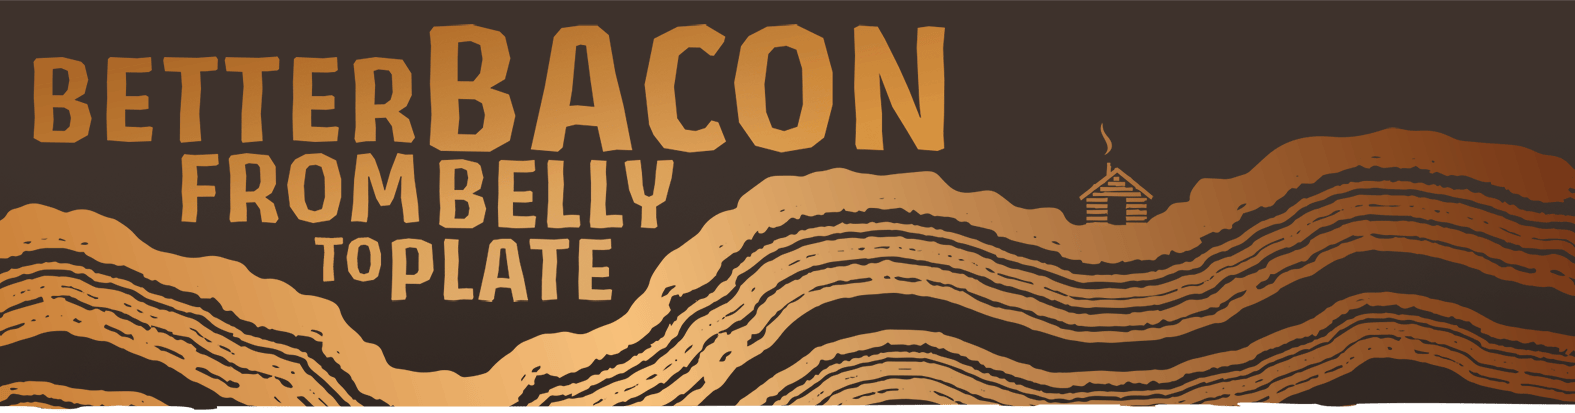 Better bacon from belly to plate